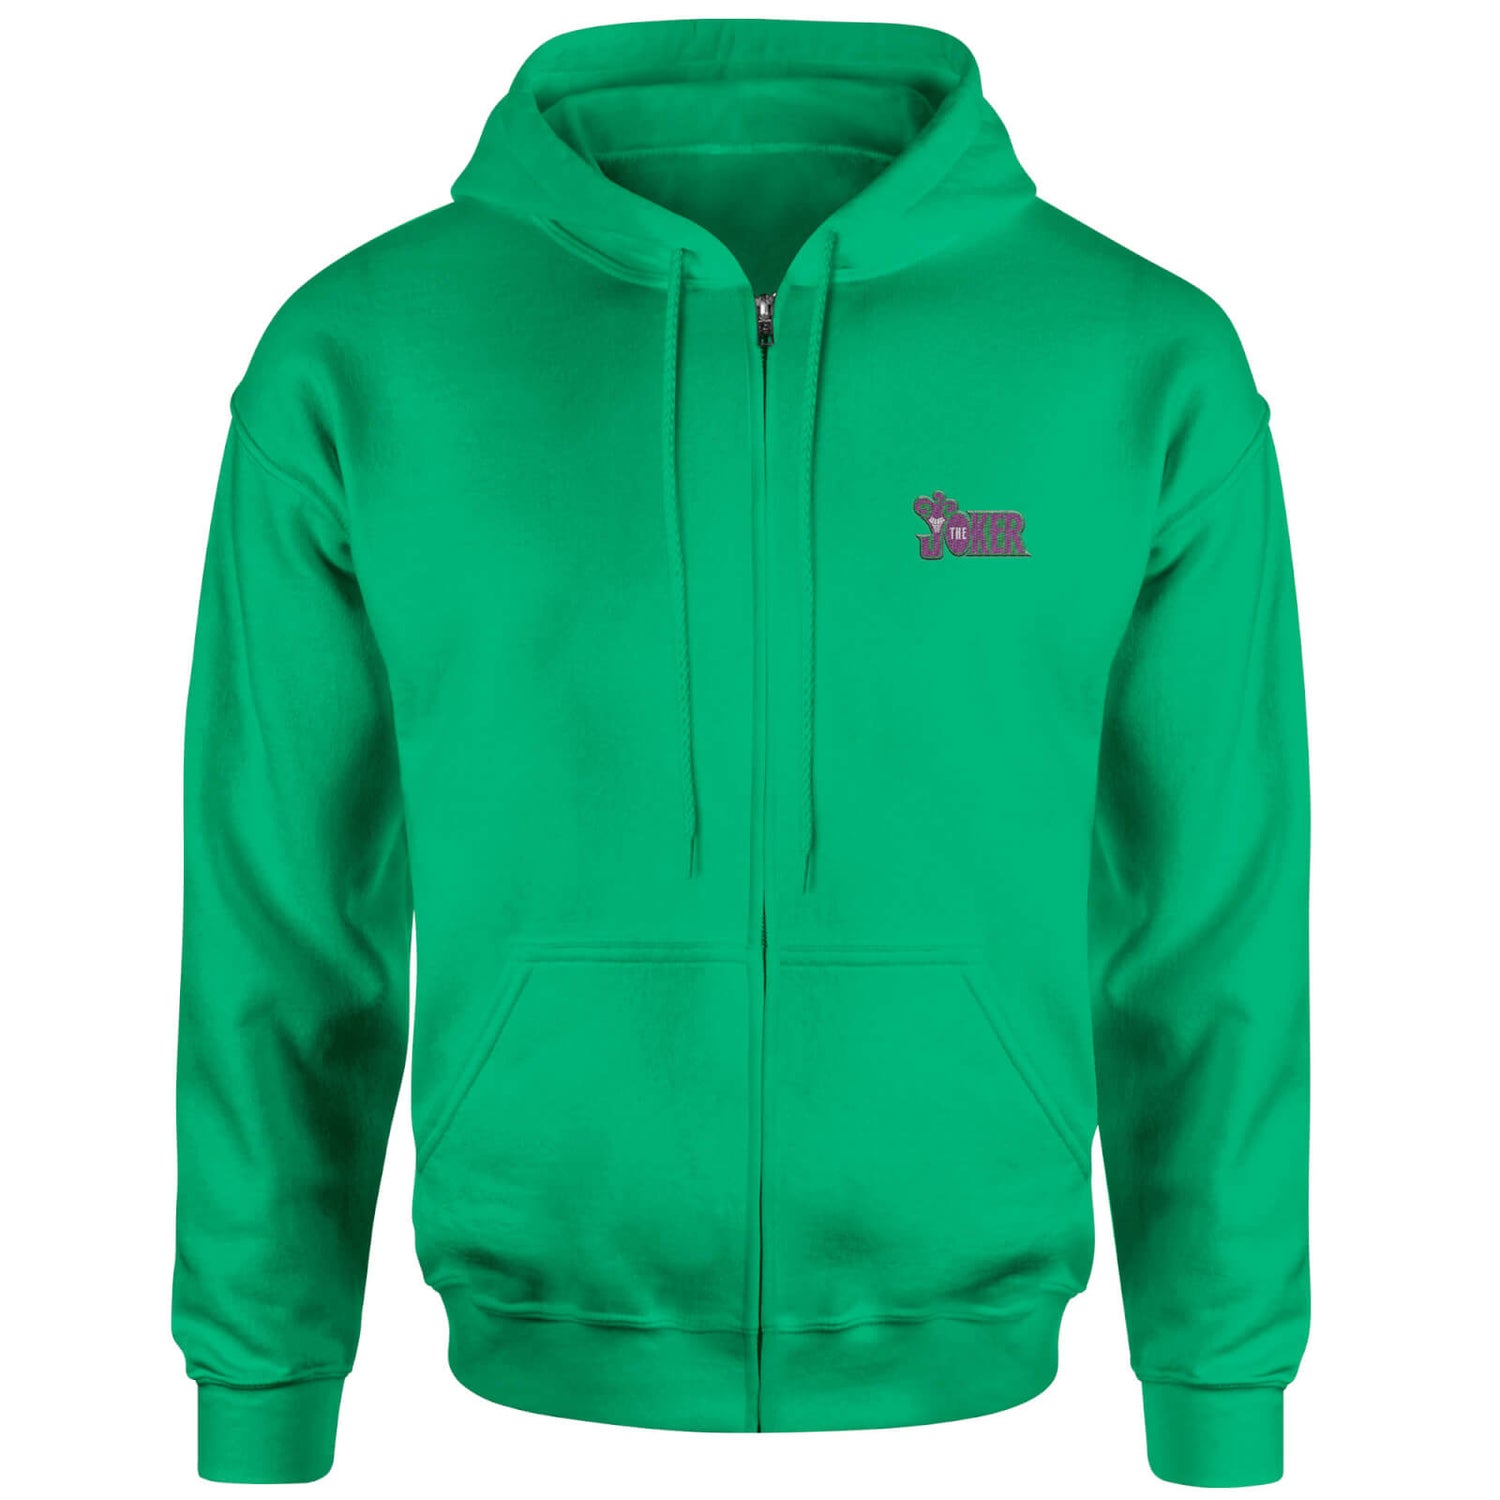 The Joker Embroidered Unisex Zipped Hoodie - Green